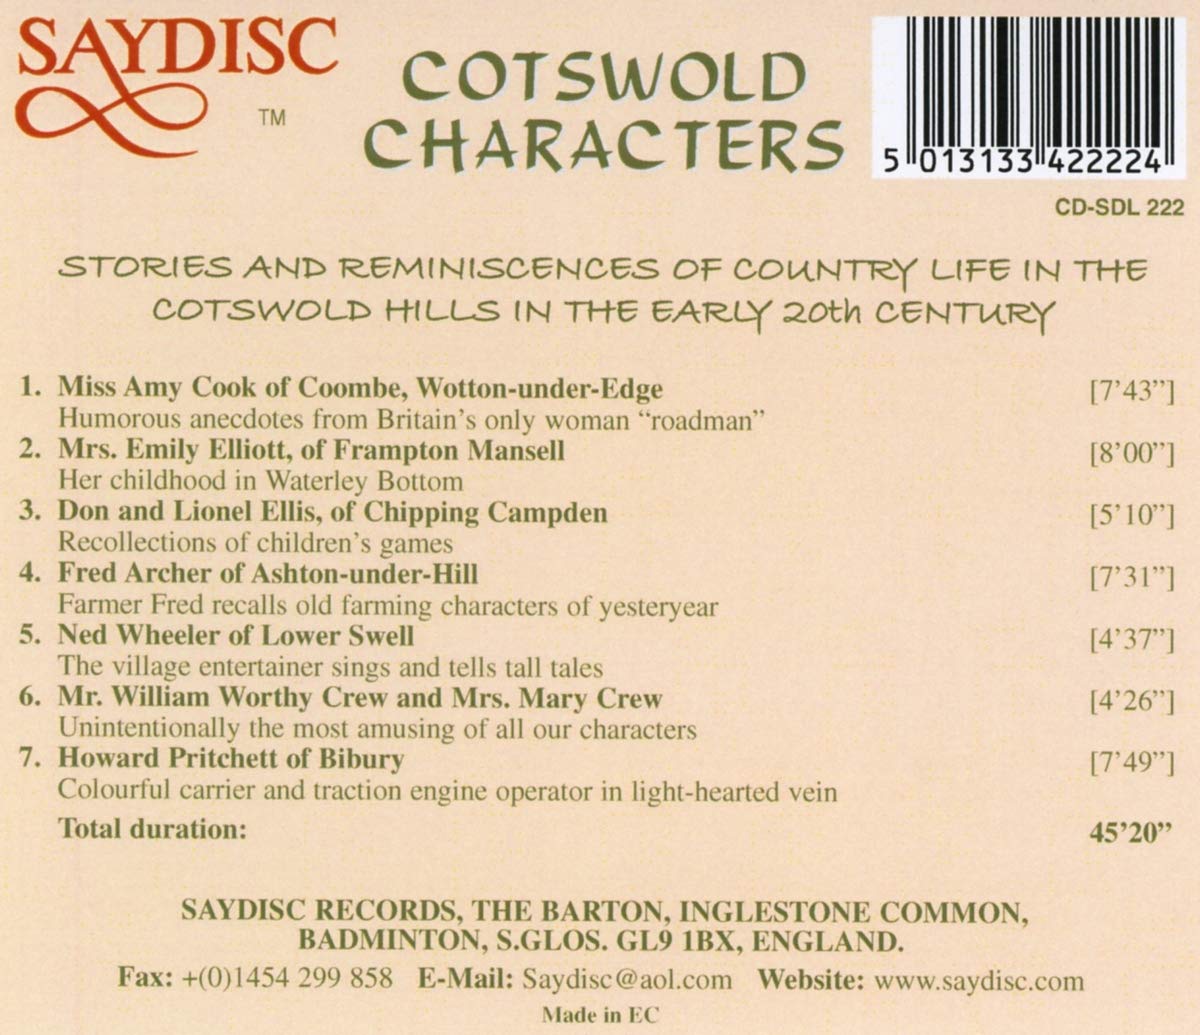 Cotswold Characters: Stories and Reminiscences Of Country Life In The Cotswold Hills In The Early 20th Century